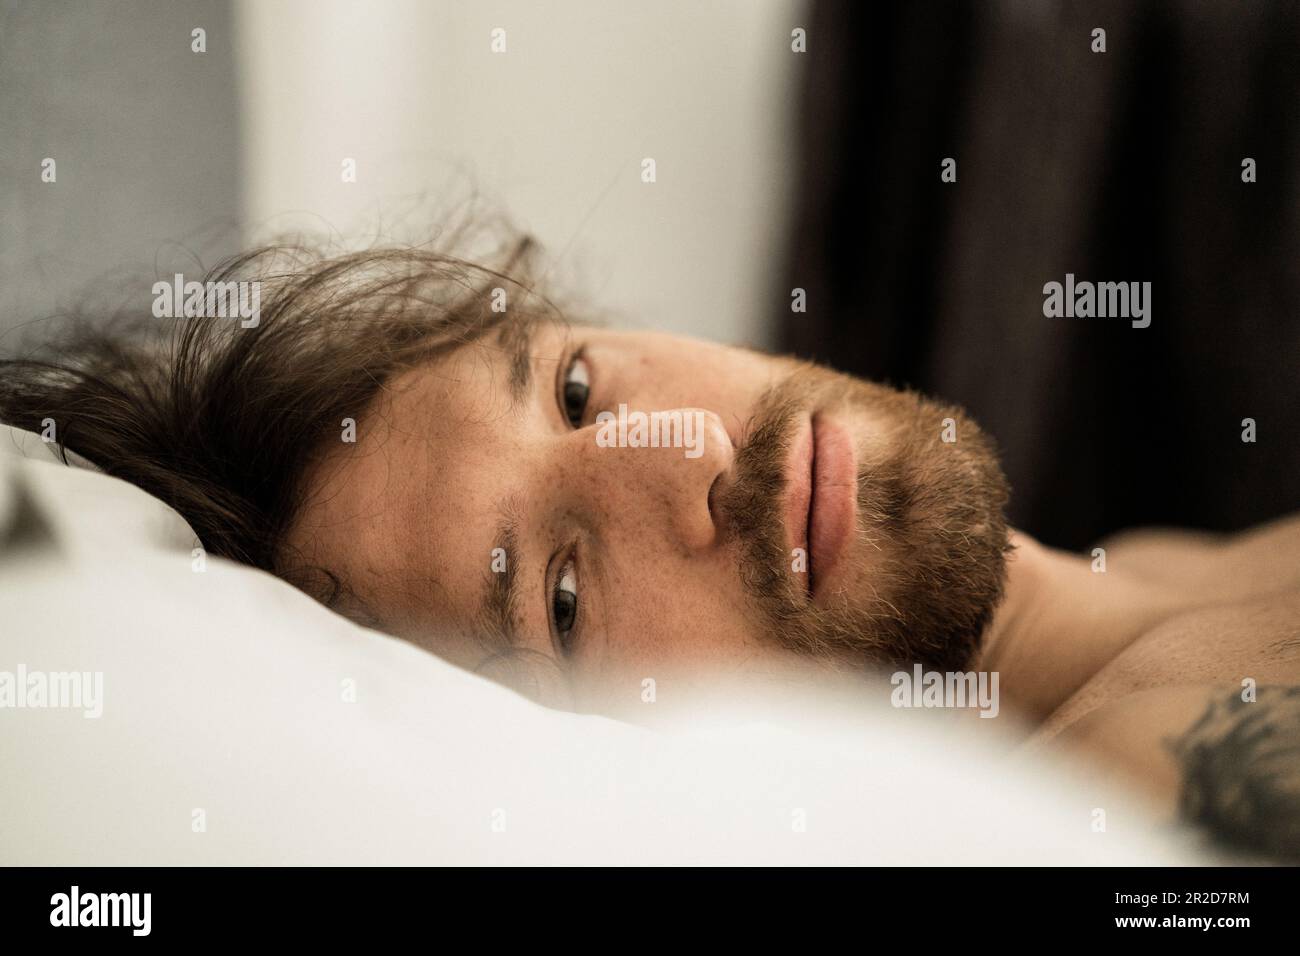 Handsome man in bed after sleep wakes up and starts a new day. Stock Photo